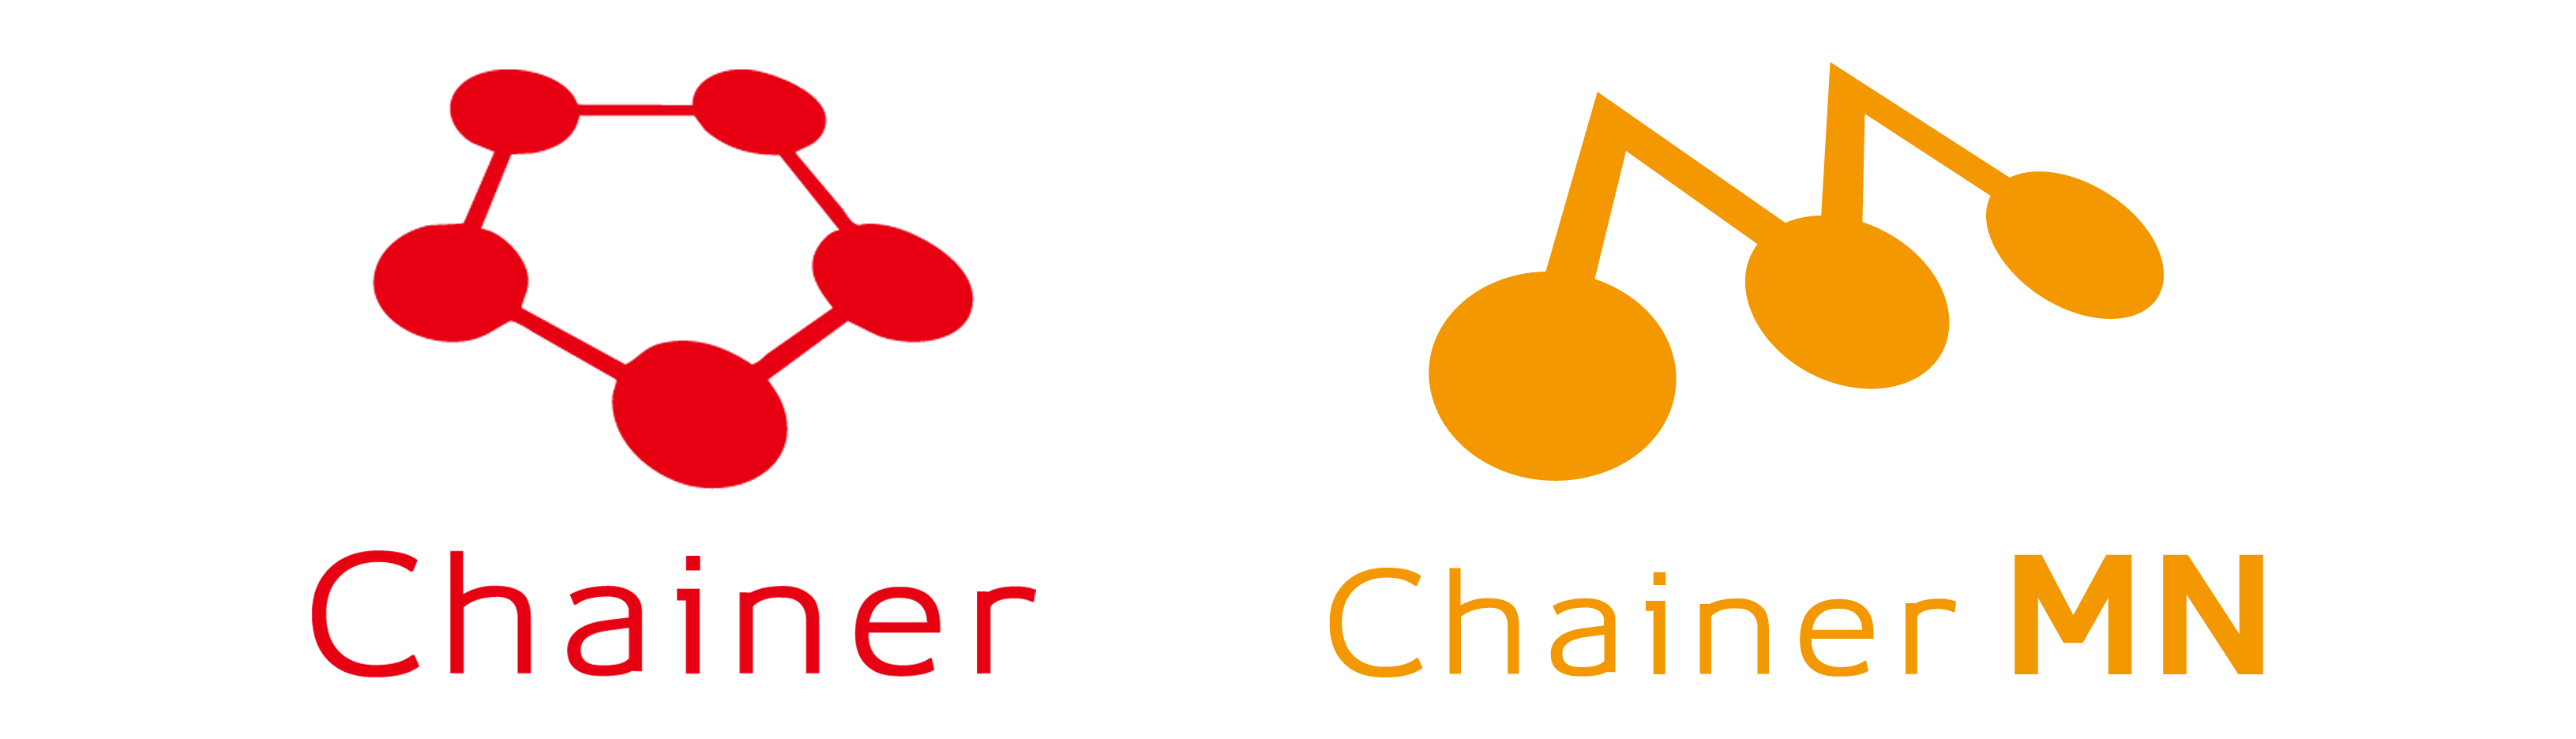 Chainer and ChainerMN logos